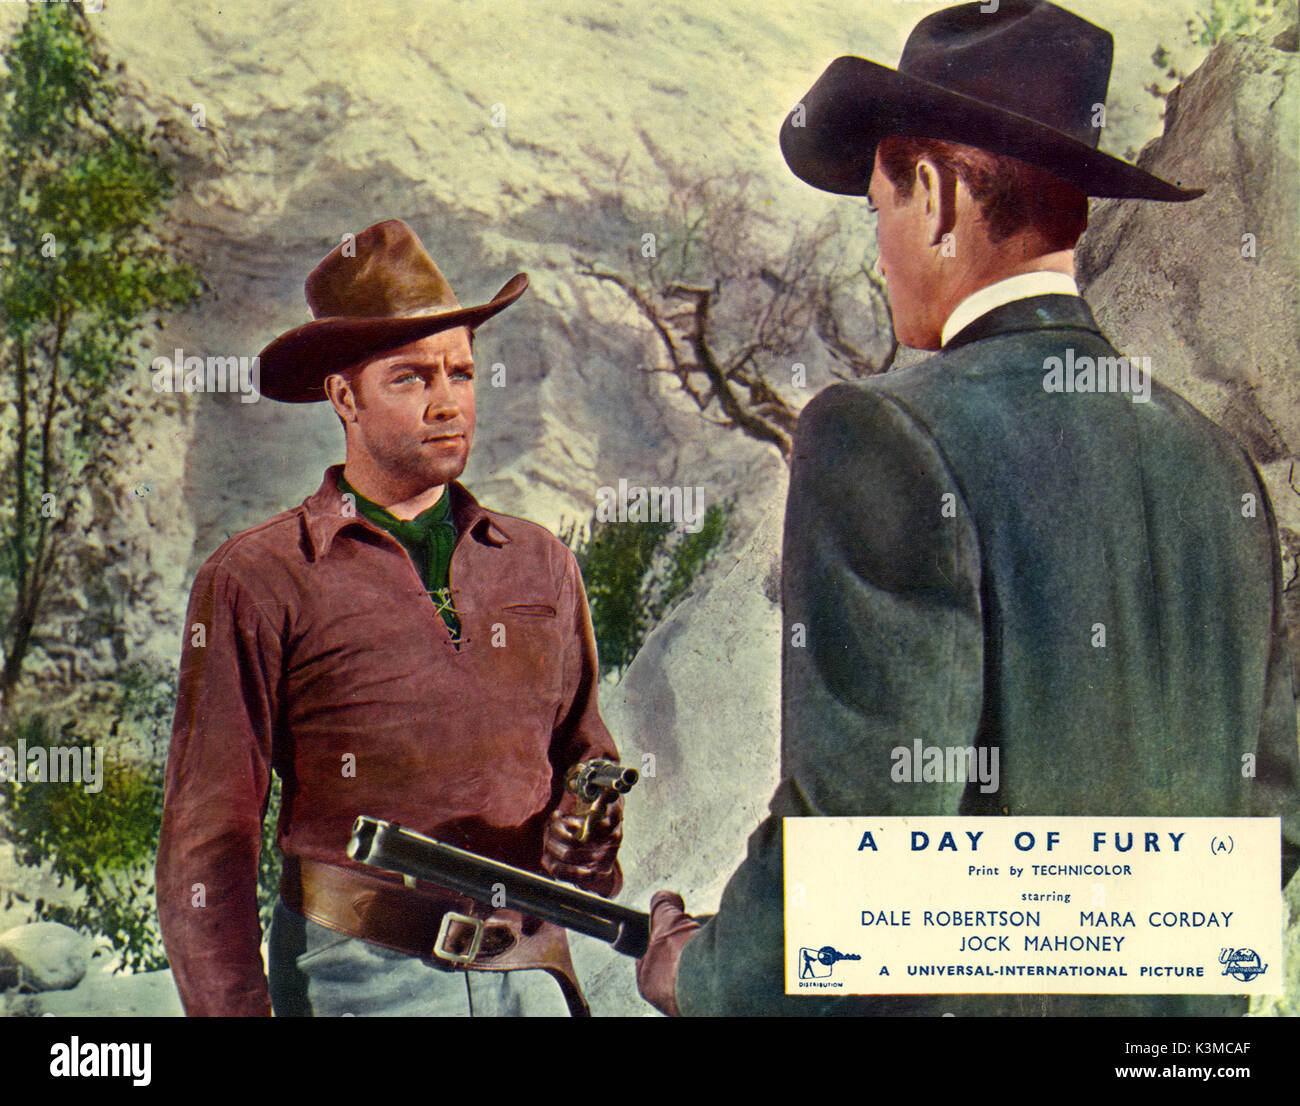 A DAY OF FURY [US 1956] DALE ROBERTSON     Date: 1956 Stock Photo